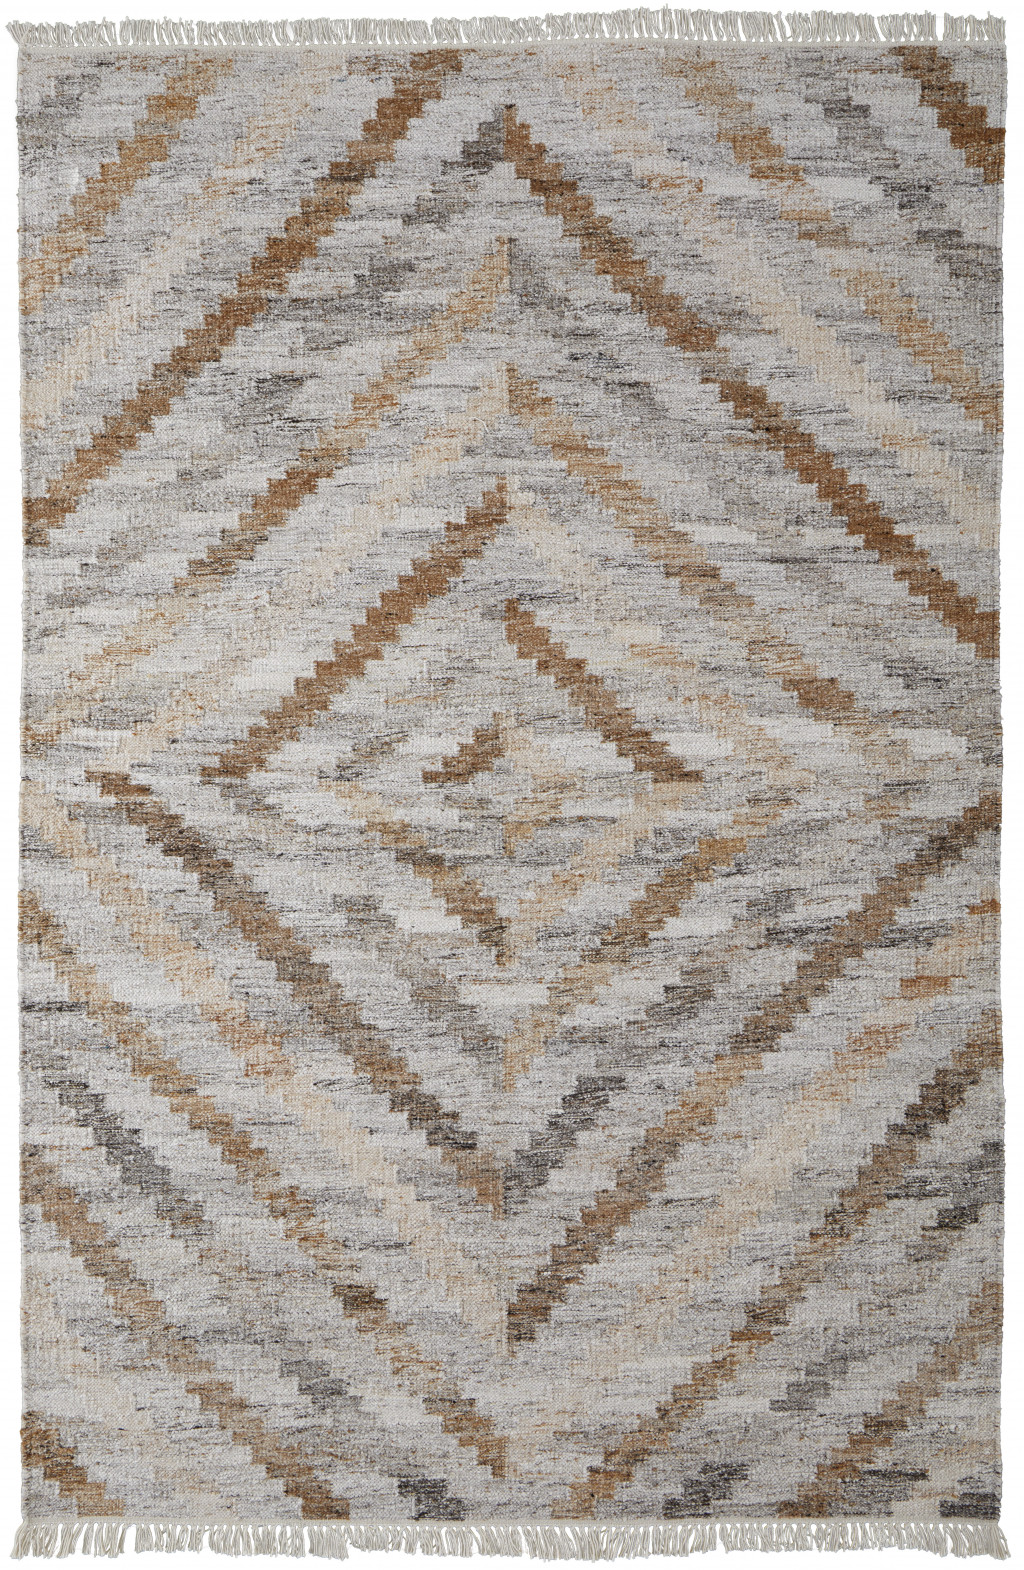 5' X 8' Ivory Gray And Tan Geometric Hand Woven Stain Resistant Area Rug With Fringe-512423-1